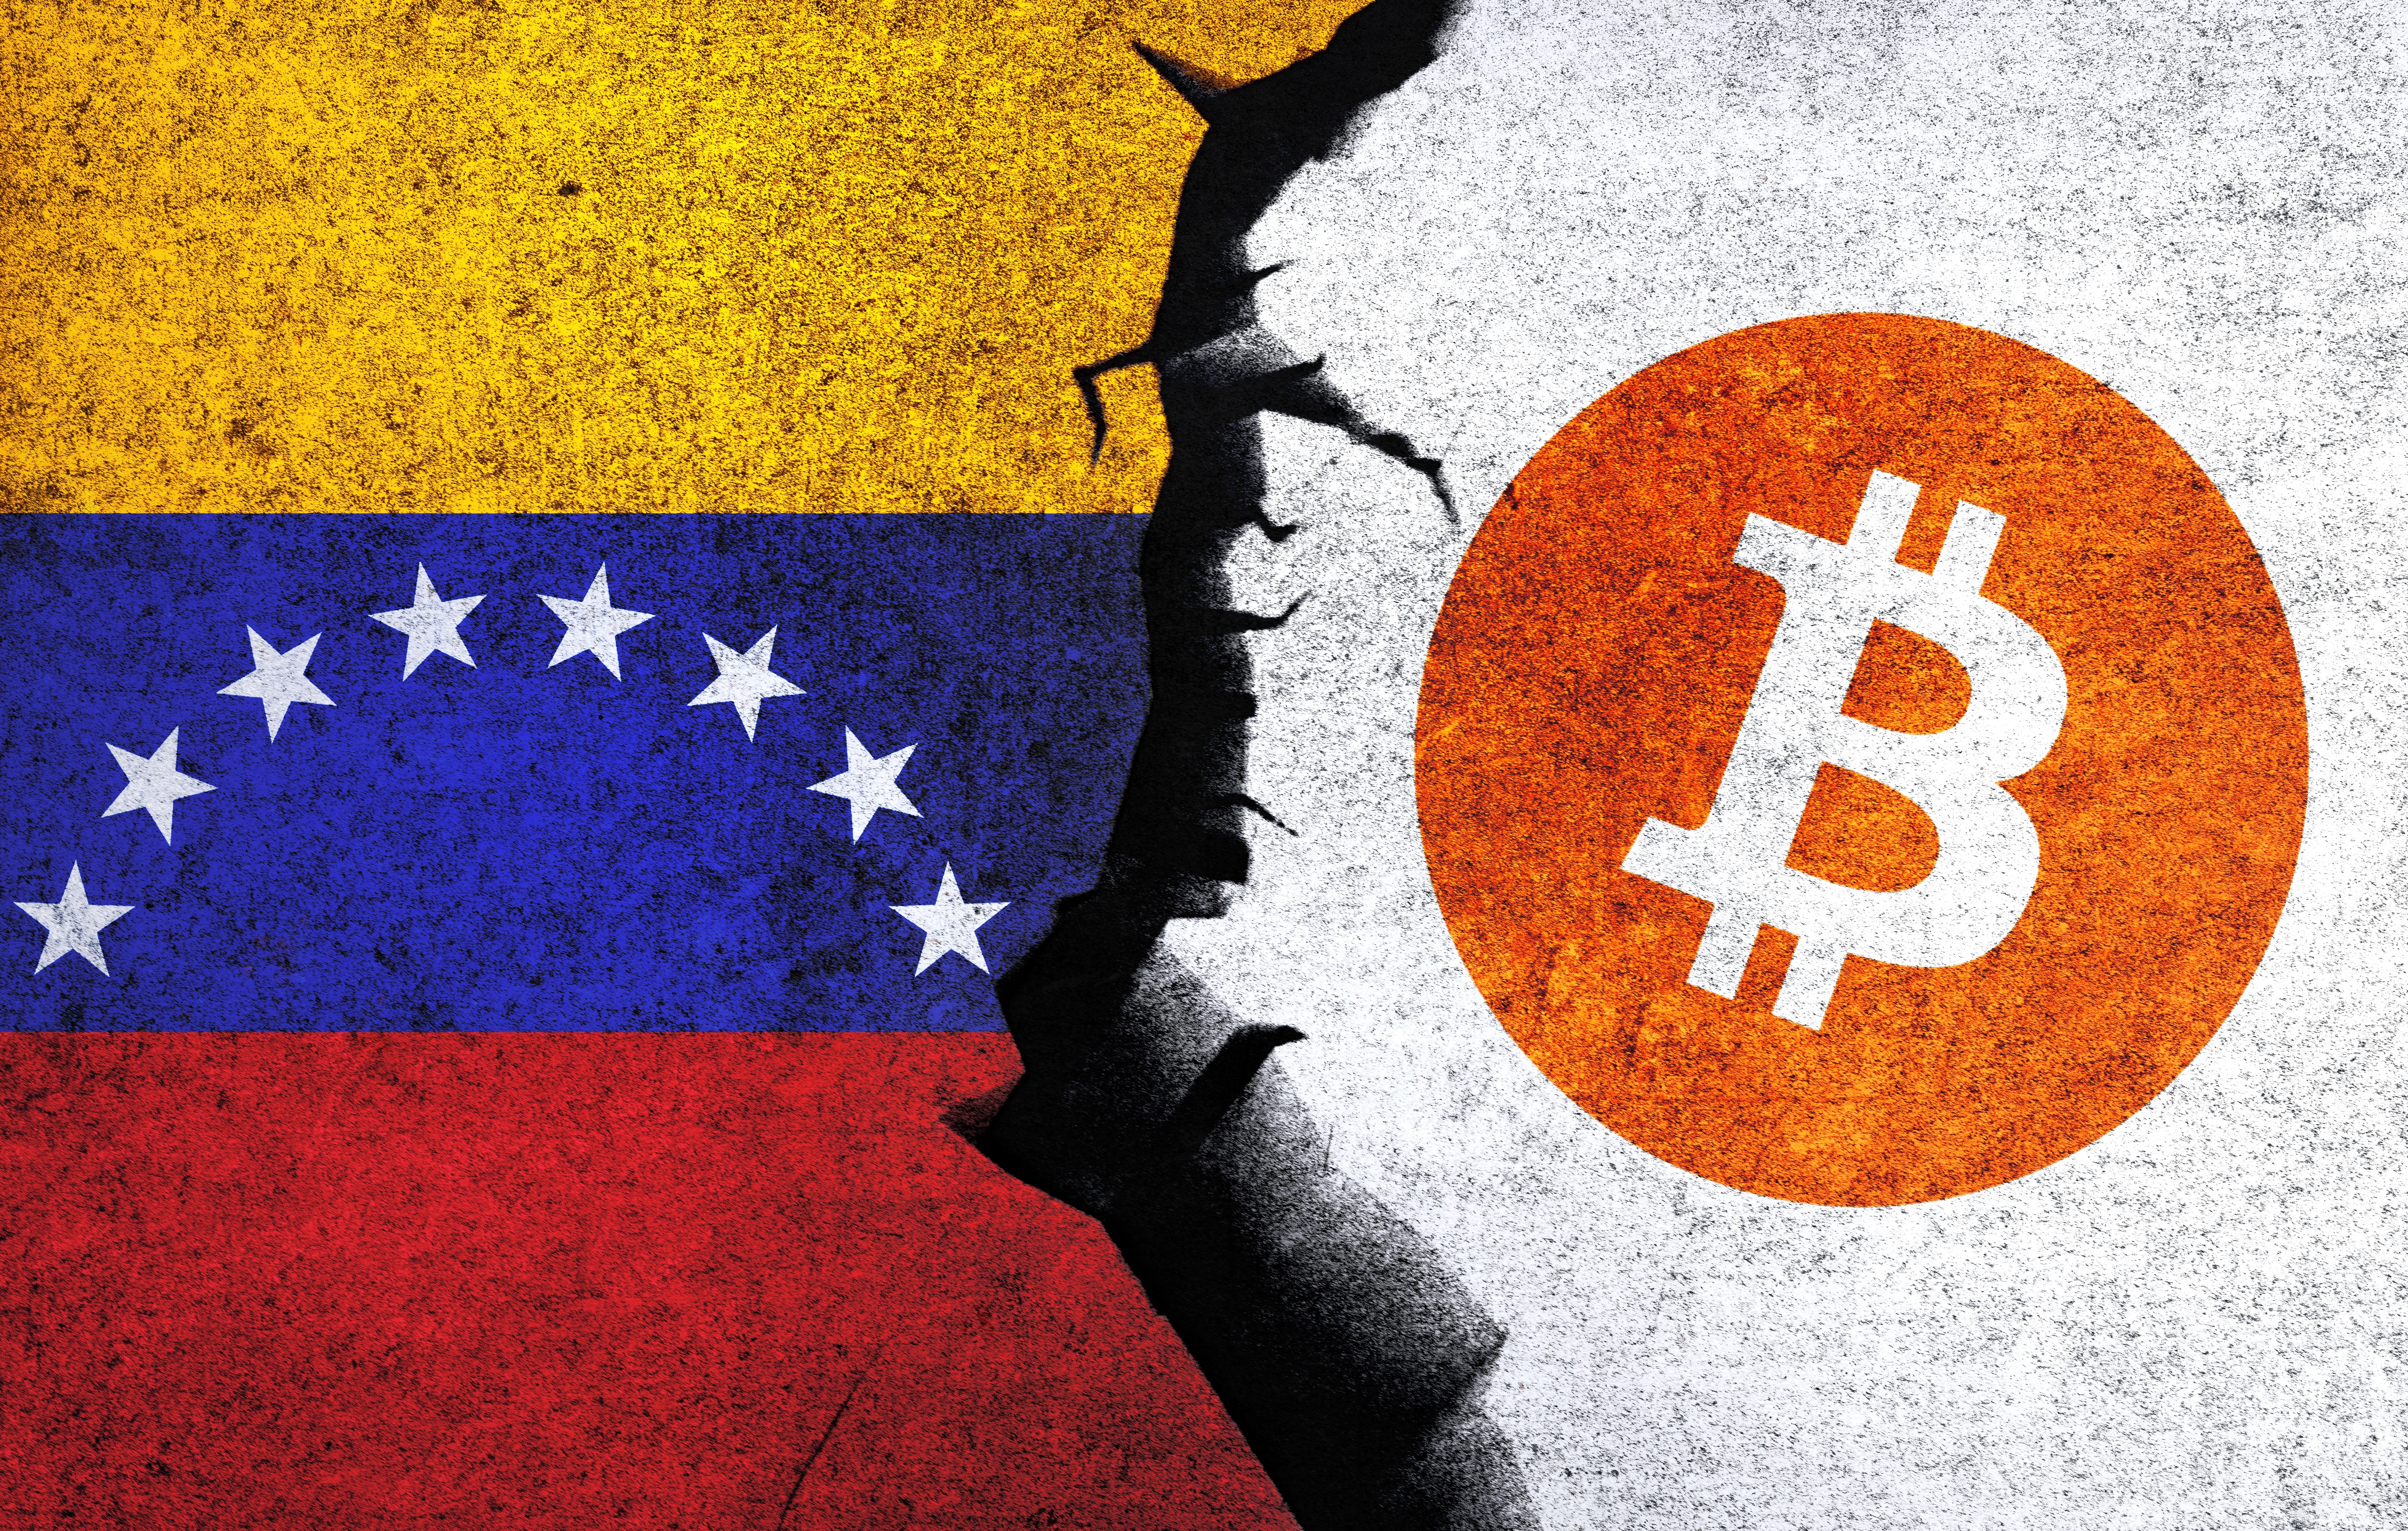 The Bitcoin logo and the Venezuela flag painted side-by-side on a wall.